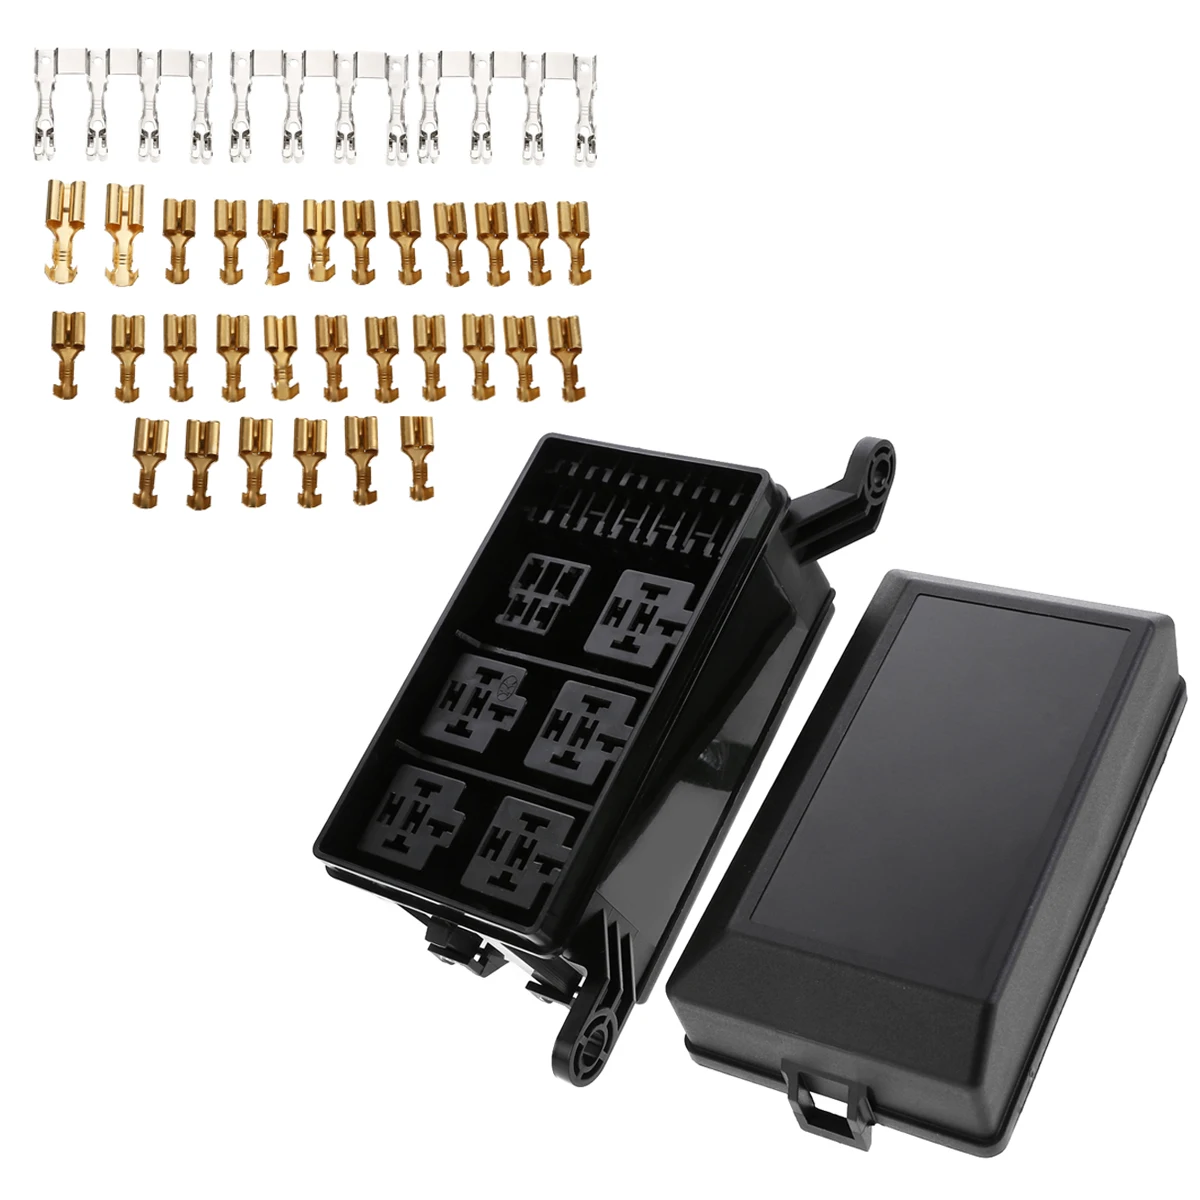 12-Slot Relay Box 6 Relays 6 ATC/ATO Fuses Holder Block + Metallic Pins For Automotive Accessories